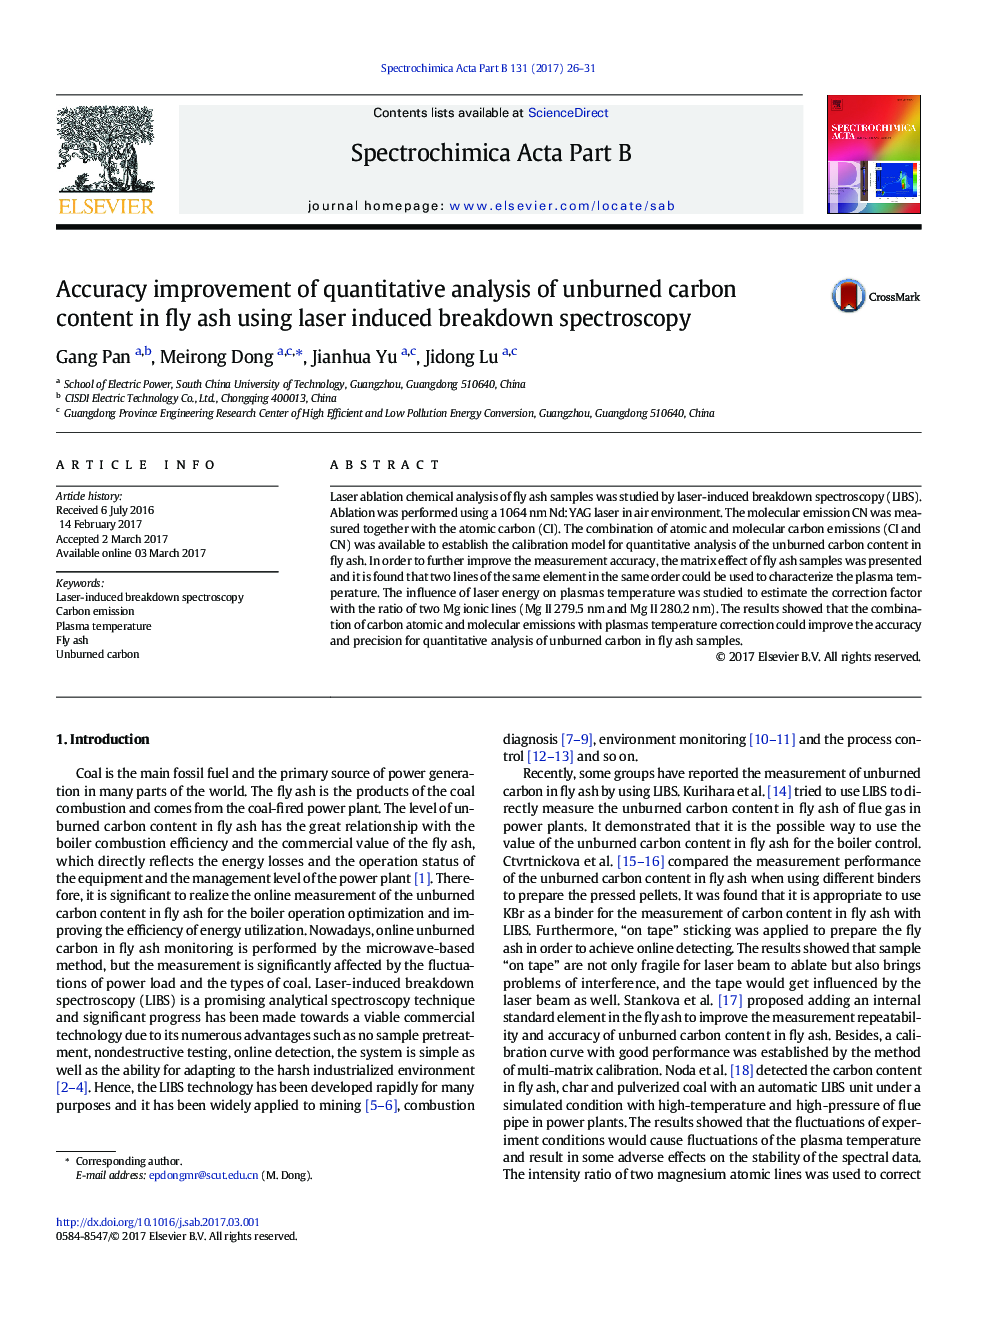 Accuracy improvement of quantitative analysis of unburned carbon content in fly ash using laser induced breakdown spectroscopy